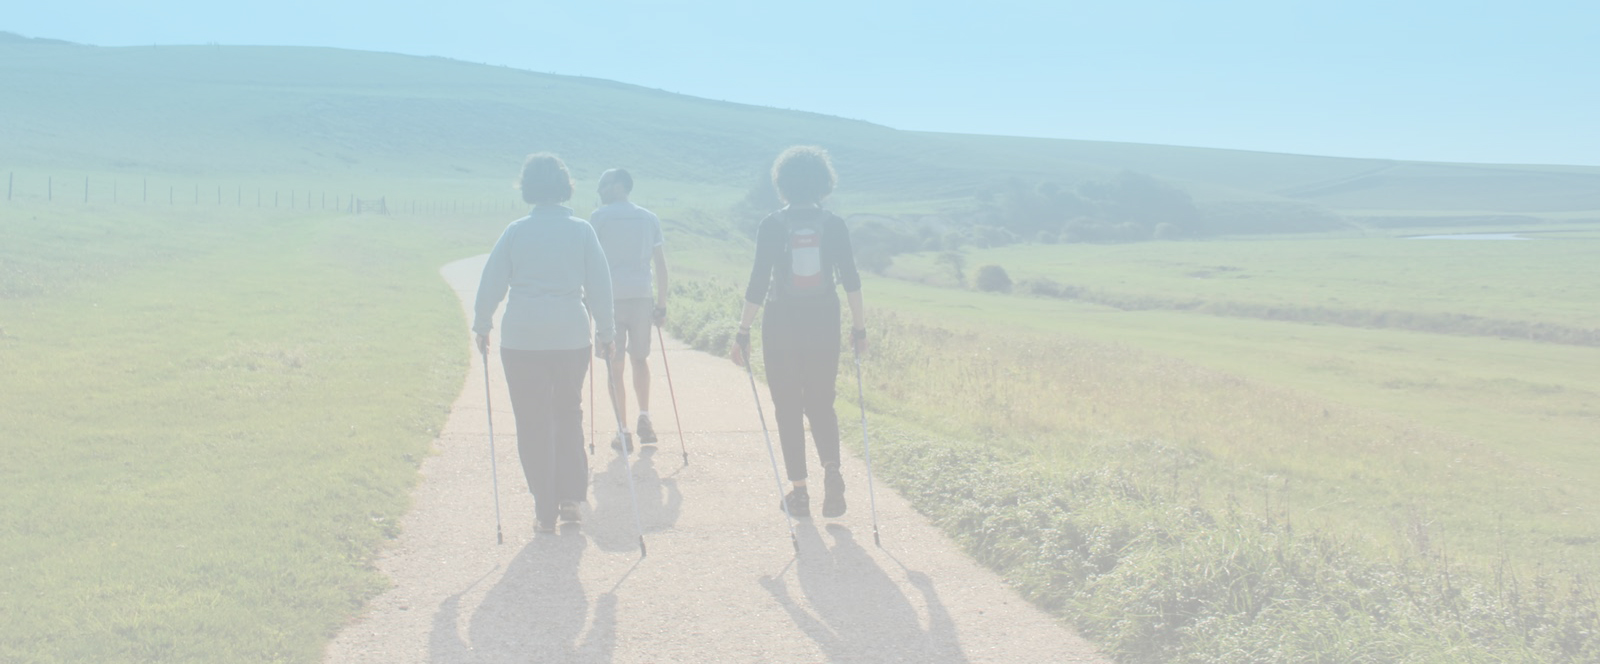 Nordic Walking for Health, South East England